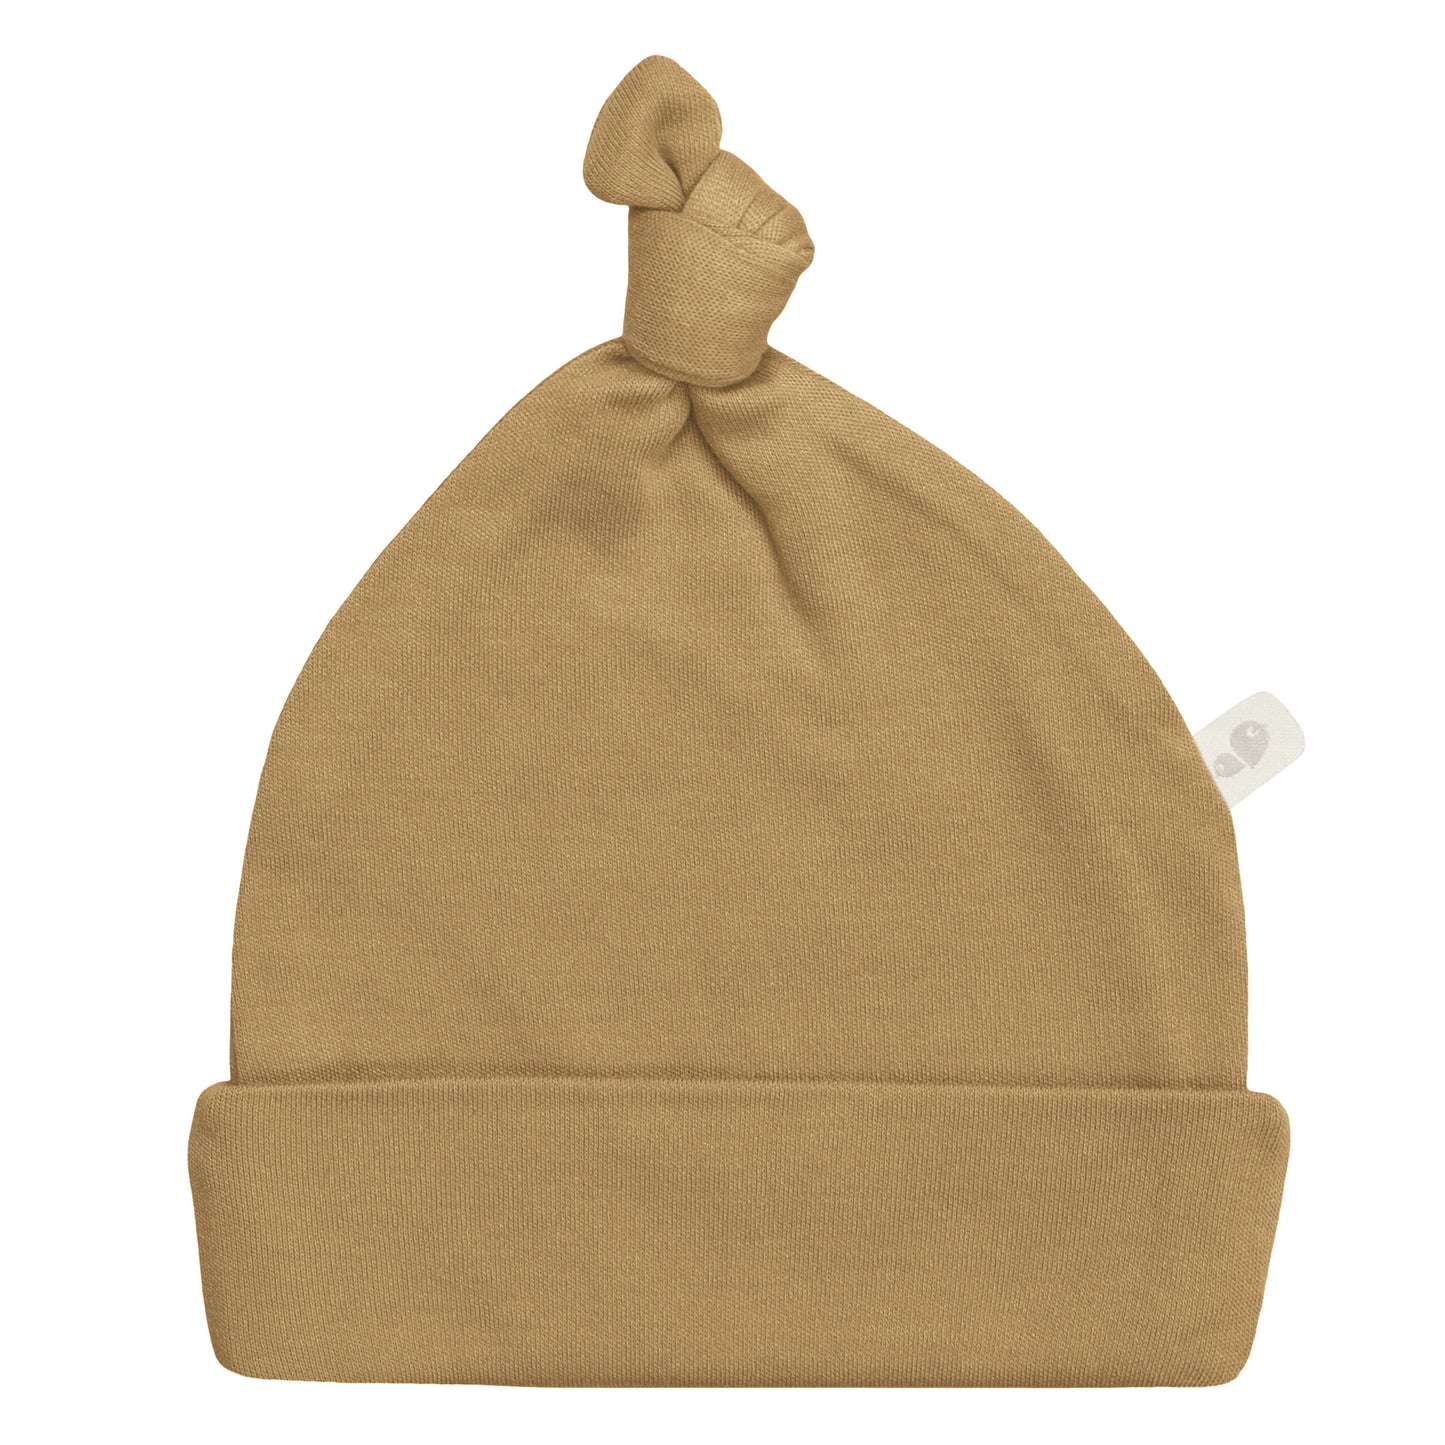 Bamboo knotted hat - Honey